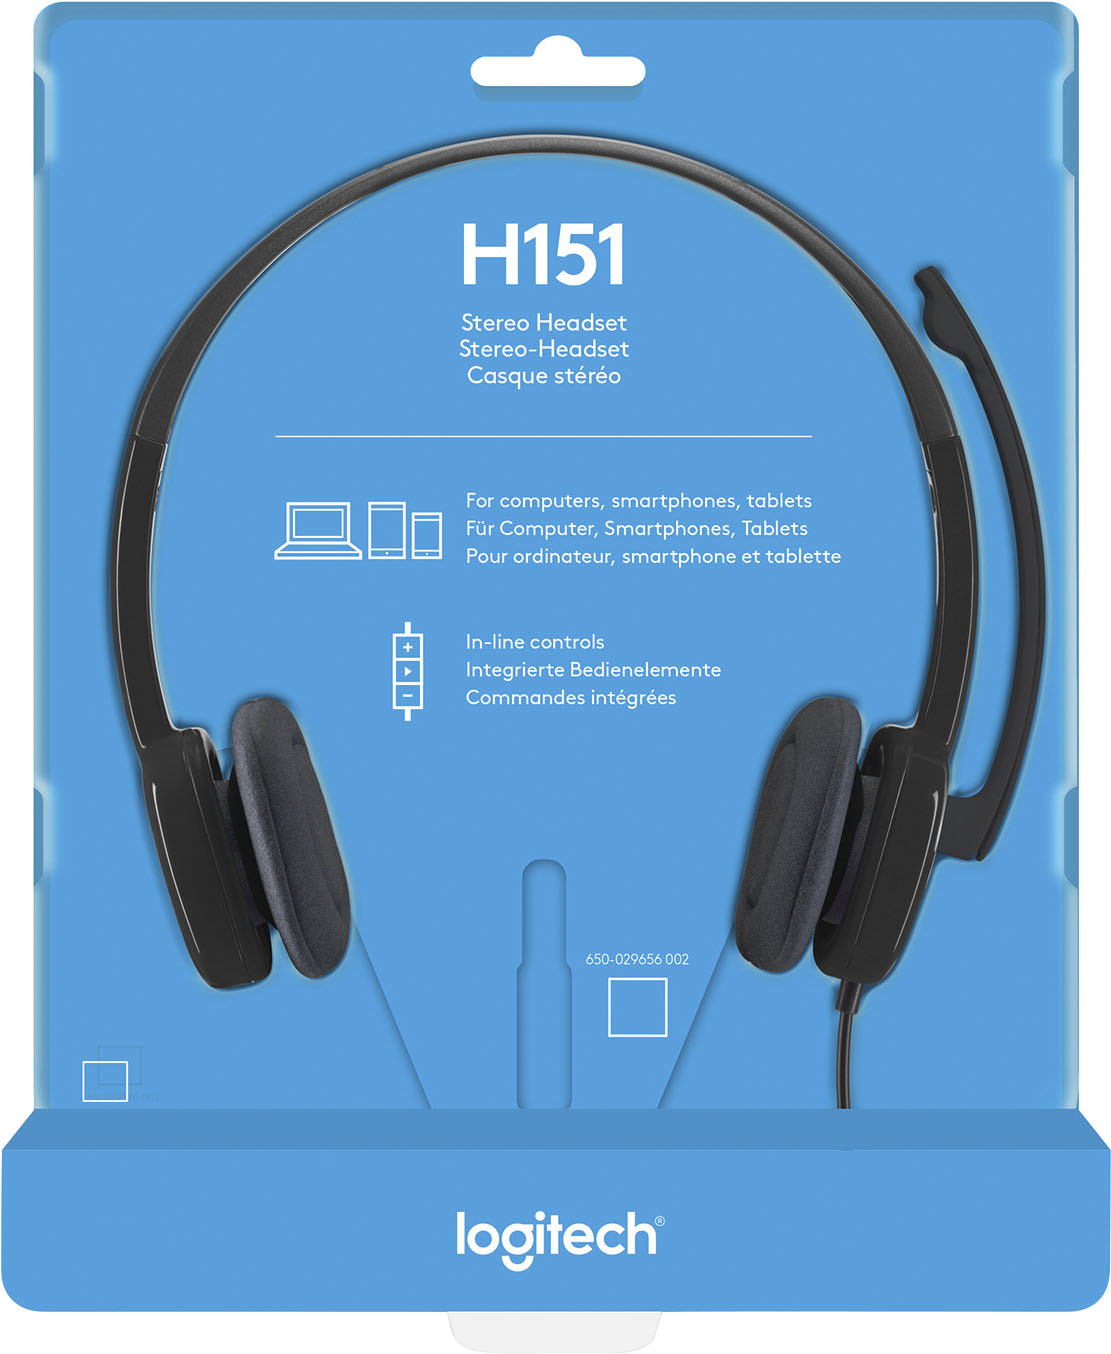 Logitech : CASQUE MICRO H151 STEREO HEADSET 1 X JACK3 5MM MƒLE STERE